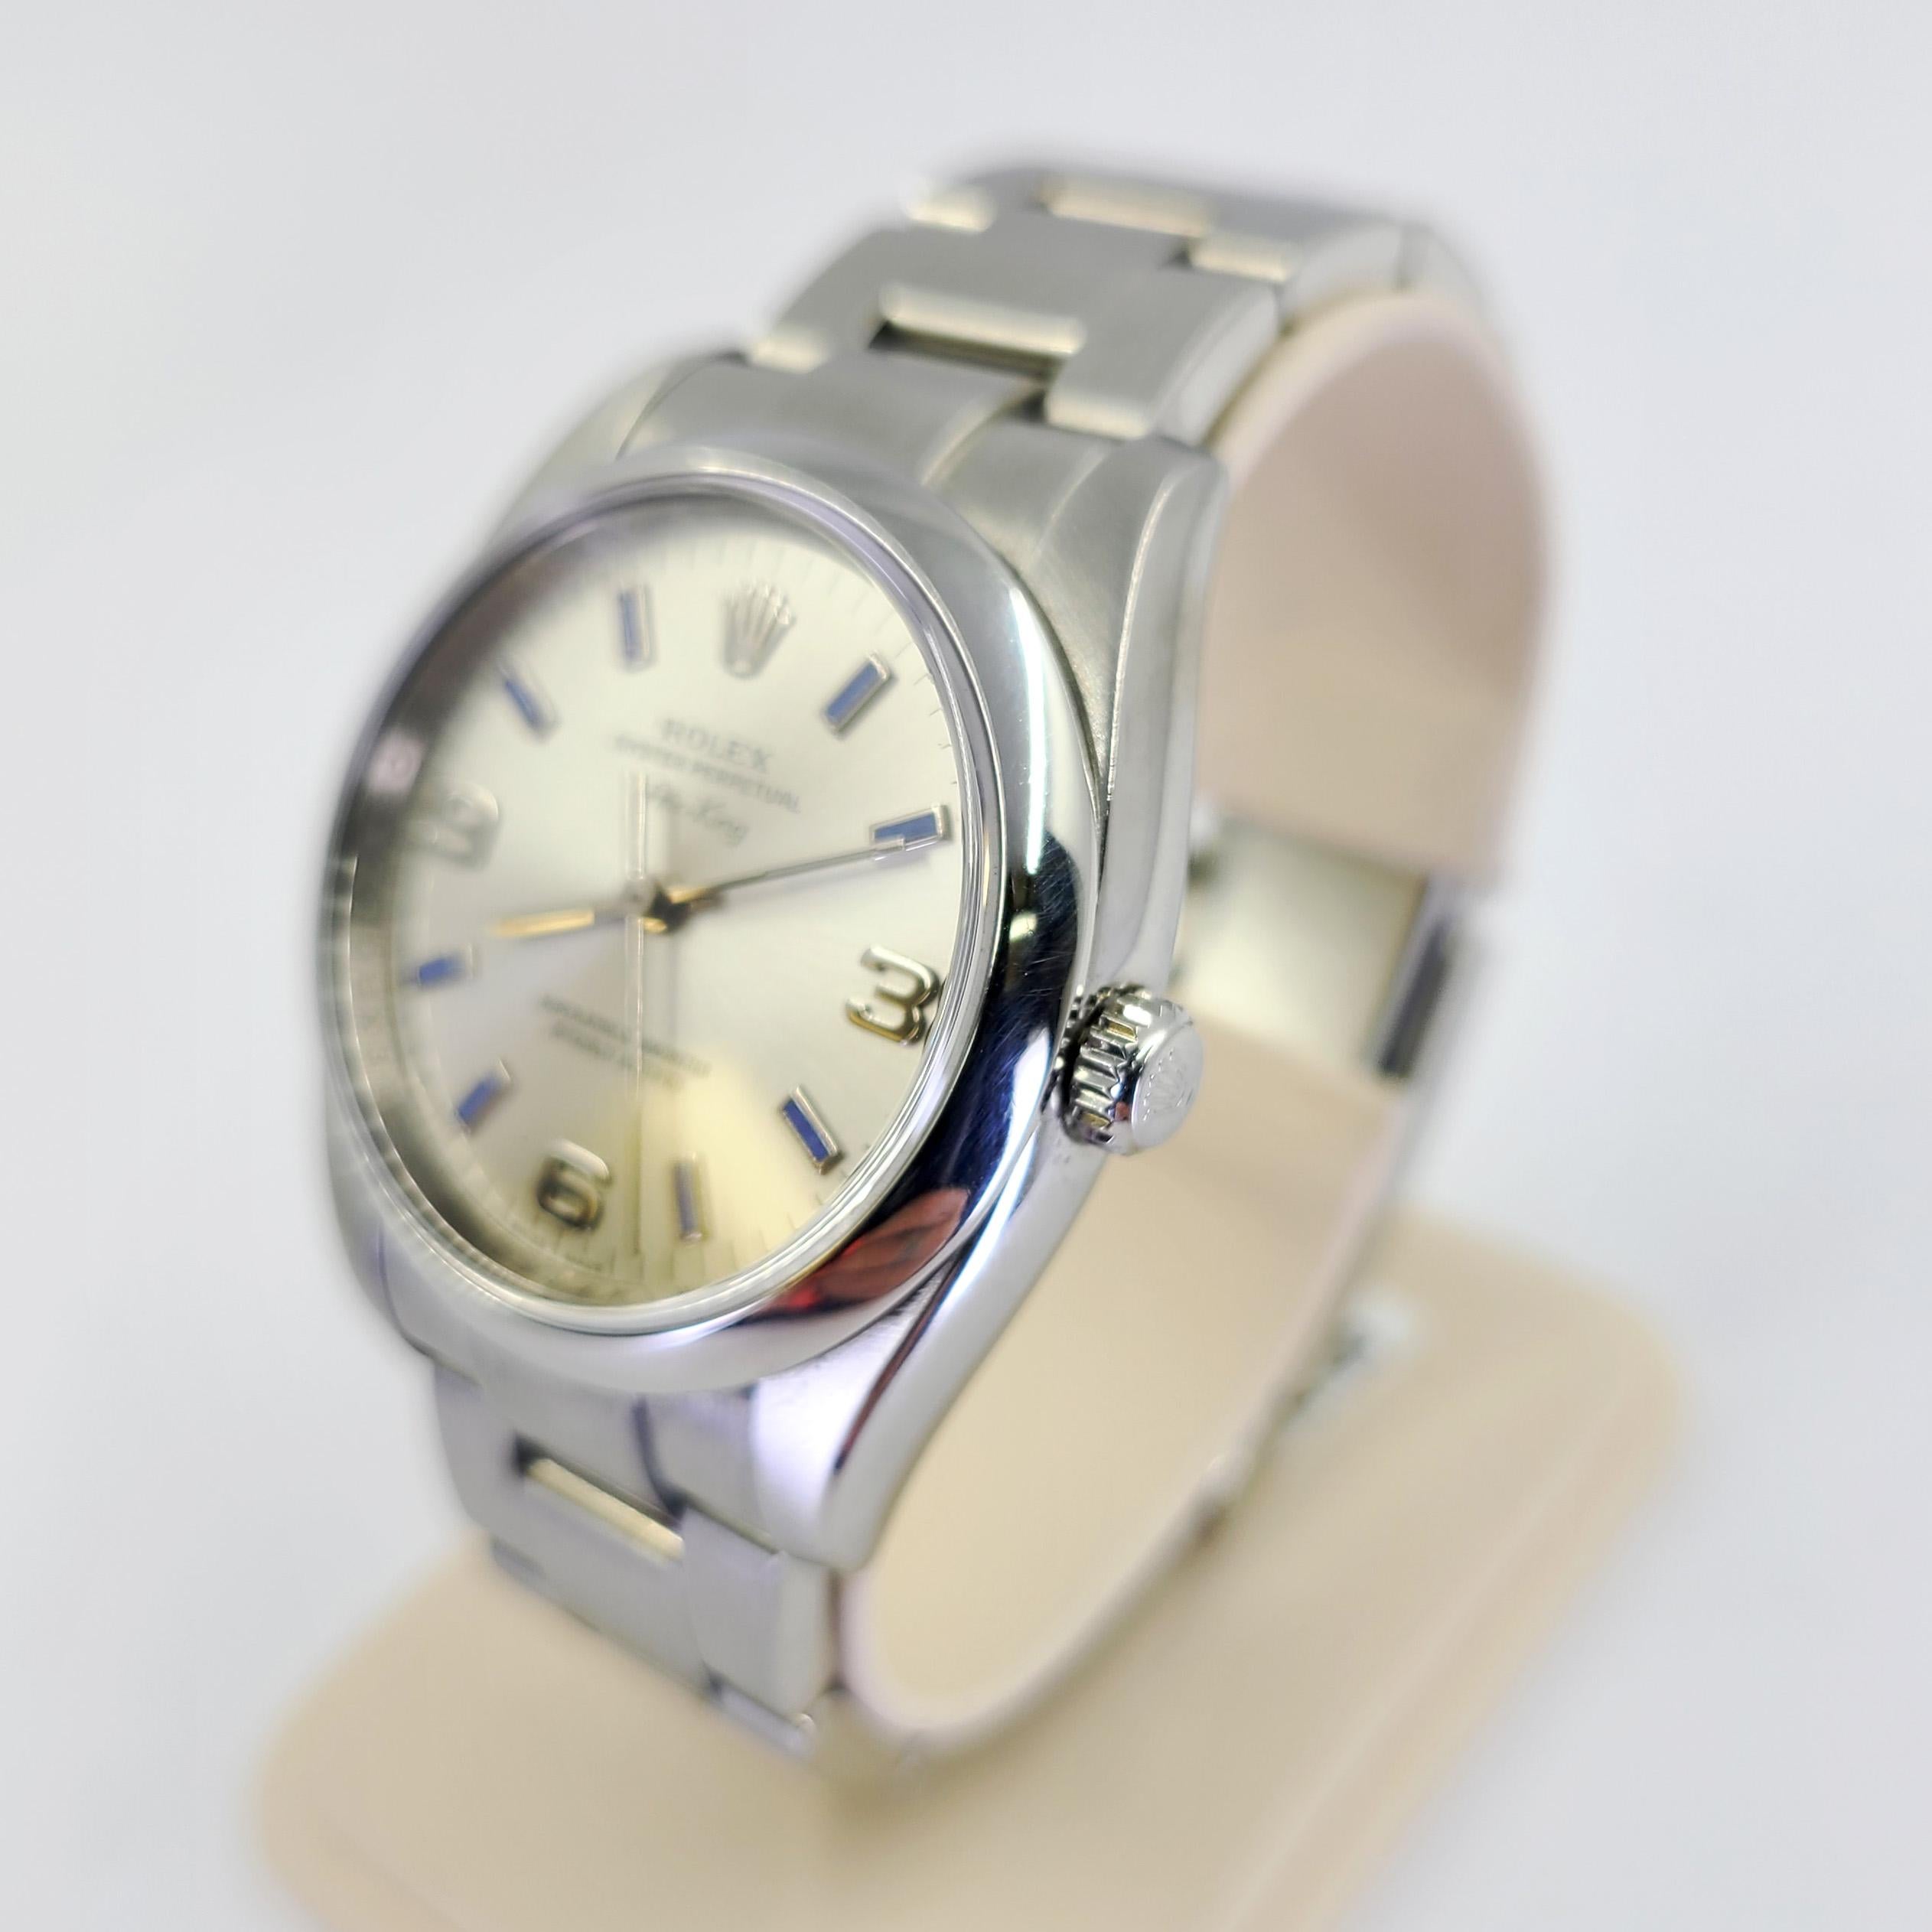 Pre-owned Rolex Oyster Perpetual Air-King 34mm Automatic Wristwatch in Steel with Silver Dial & Light Blue Markers On Brushed Oyster Bracelet. Model #114200, M Serial Number Circa 2008. Includes 1 Year Timekeeping Warranty.